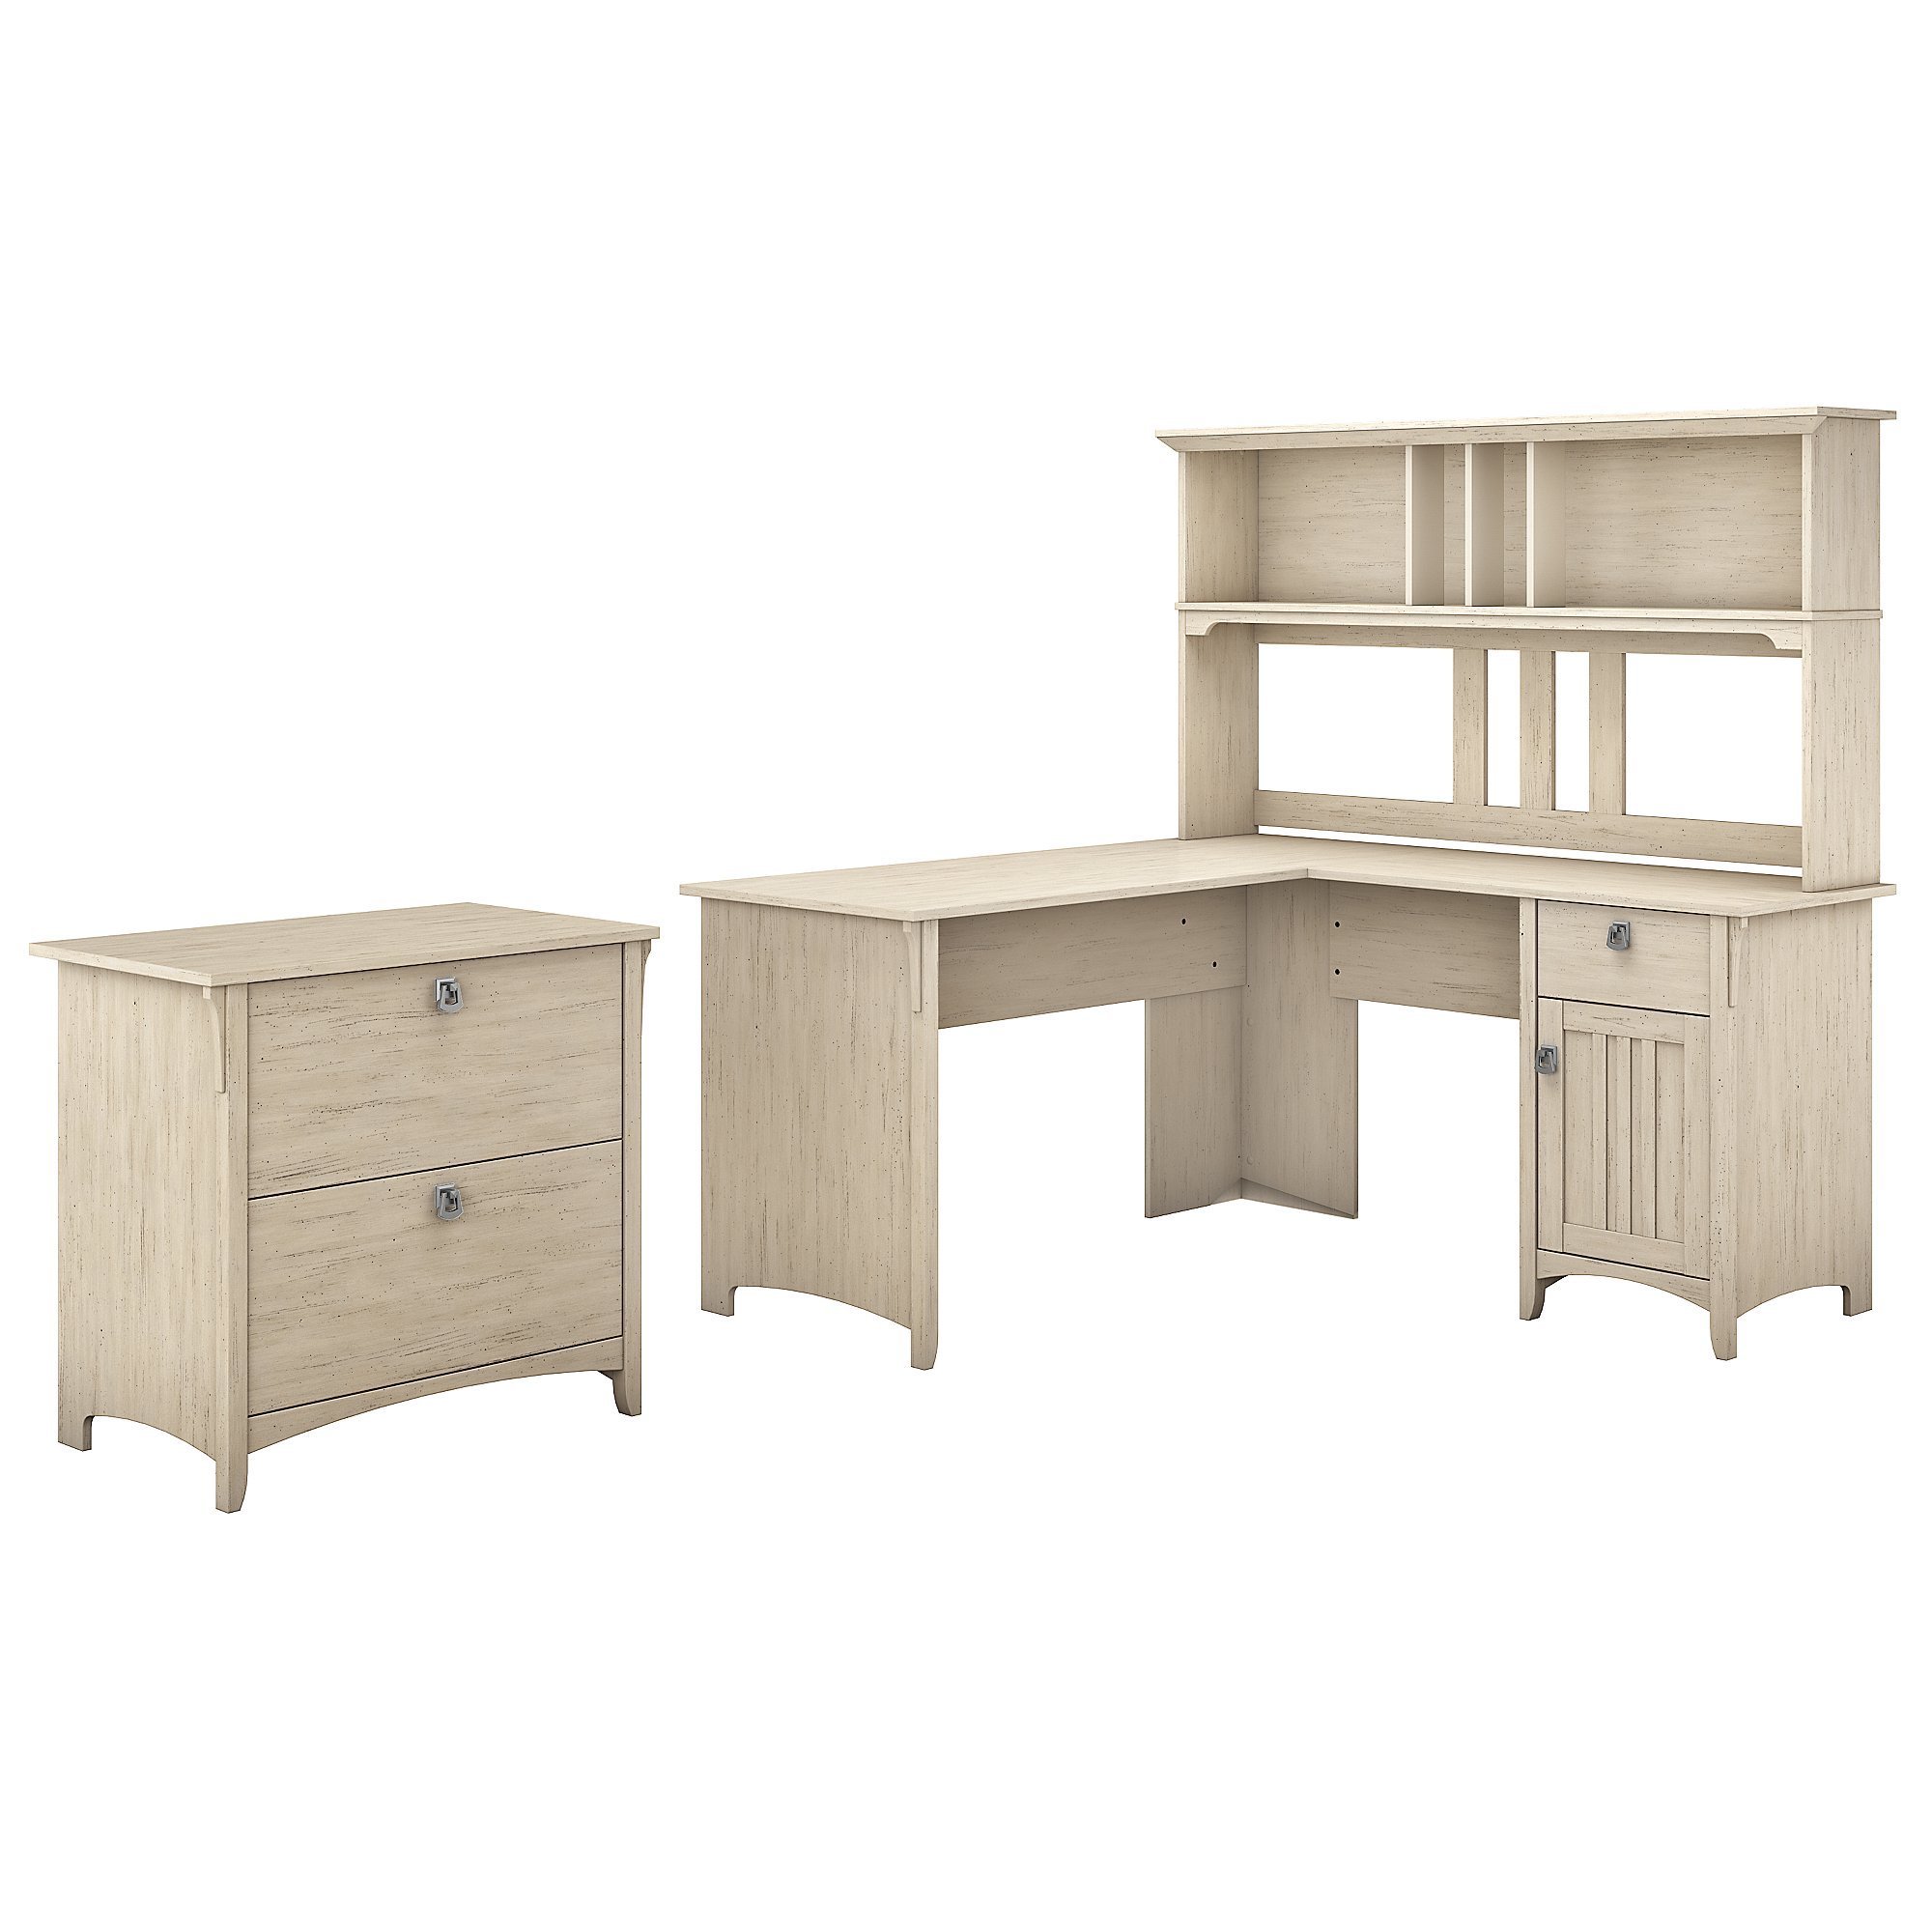 Shop The Gray Barn Ermine 60 Inch L Shaped Desk With Hutch And